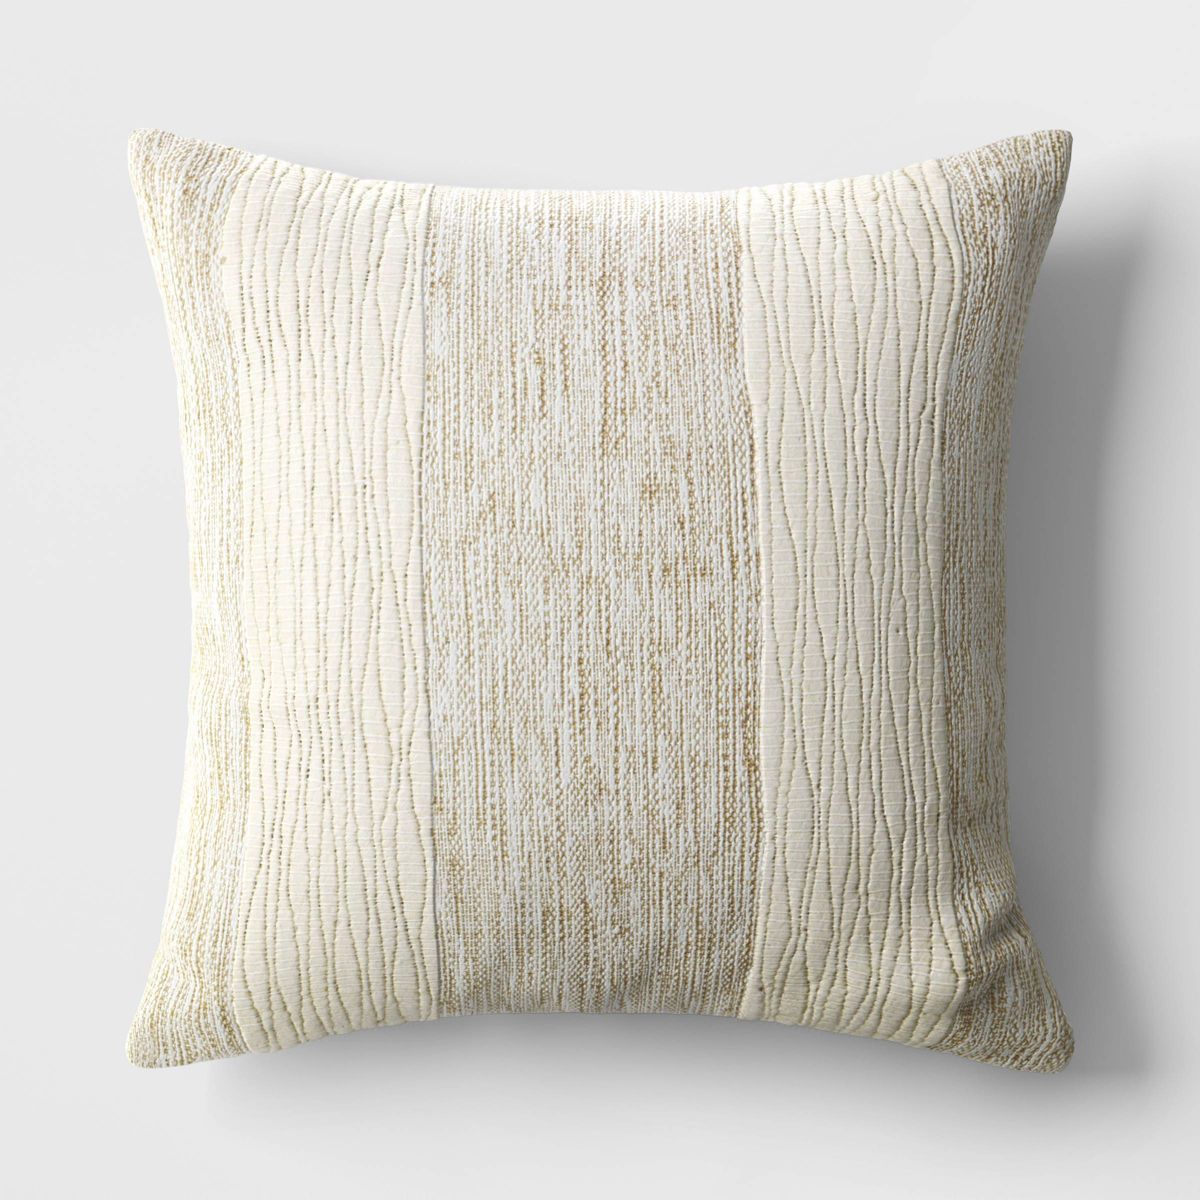 Oversized Chunky Textured Cotton Blend Striped Square Throw Pillow Beige - Threshold™ | Target